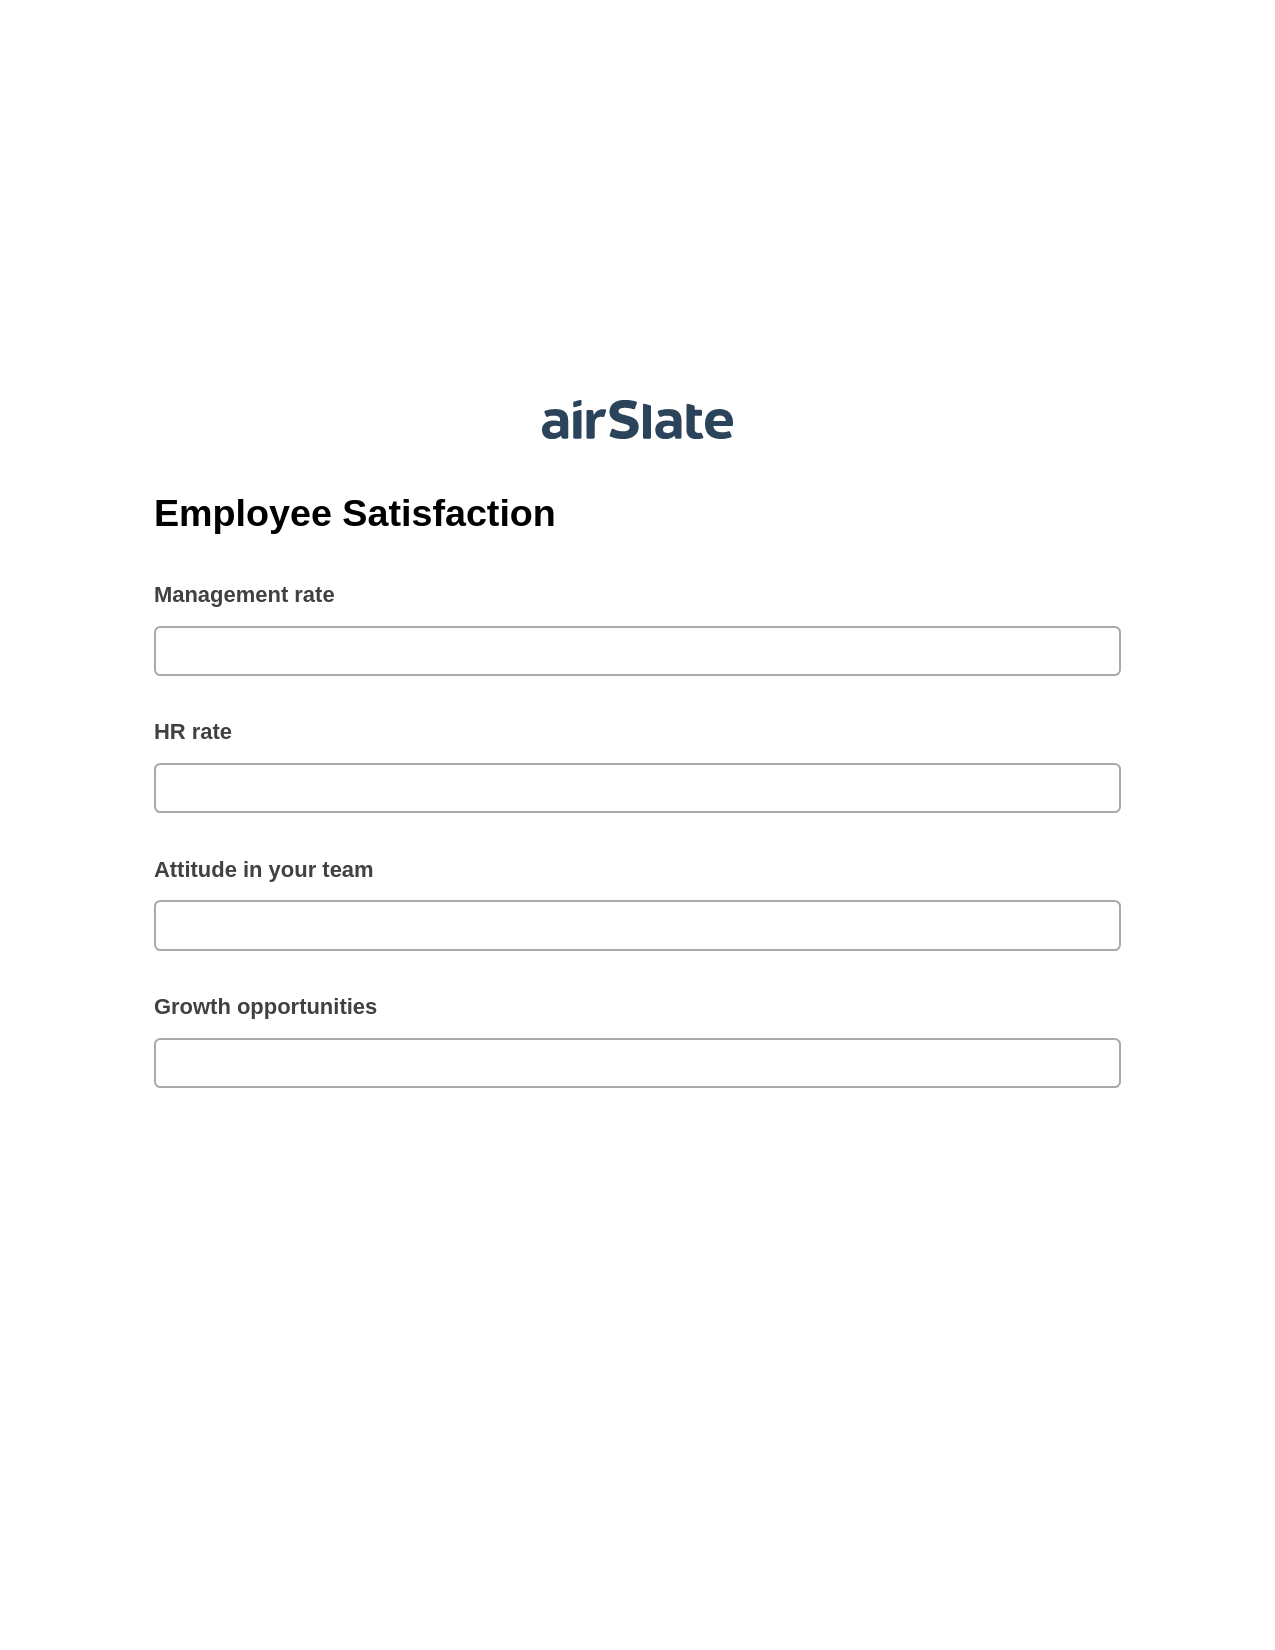 Employee Satisfaction Pre-fill Dropdowns from Excel Bot, Email Notification Bot, Archive to SharePoint Folder Bot